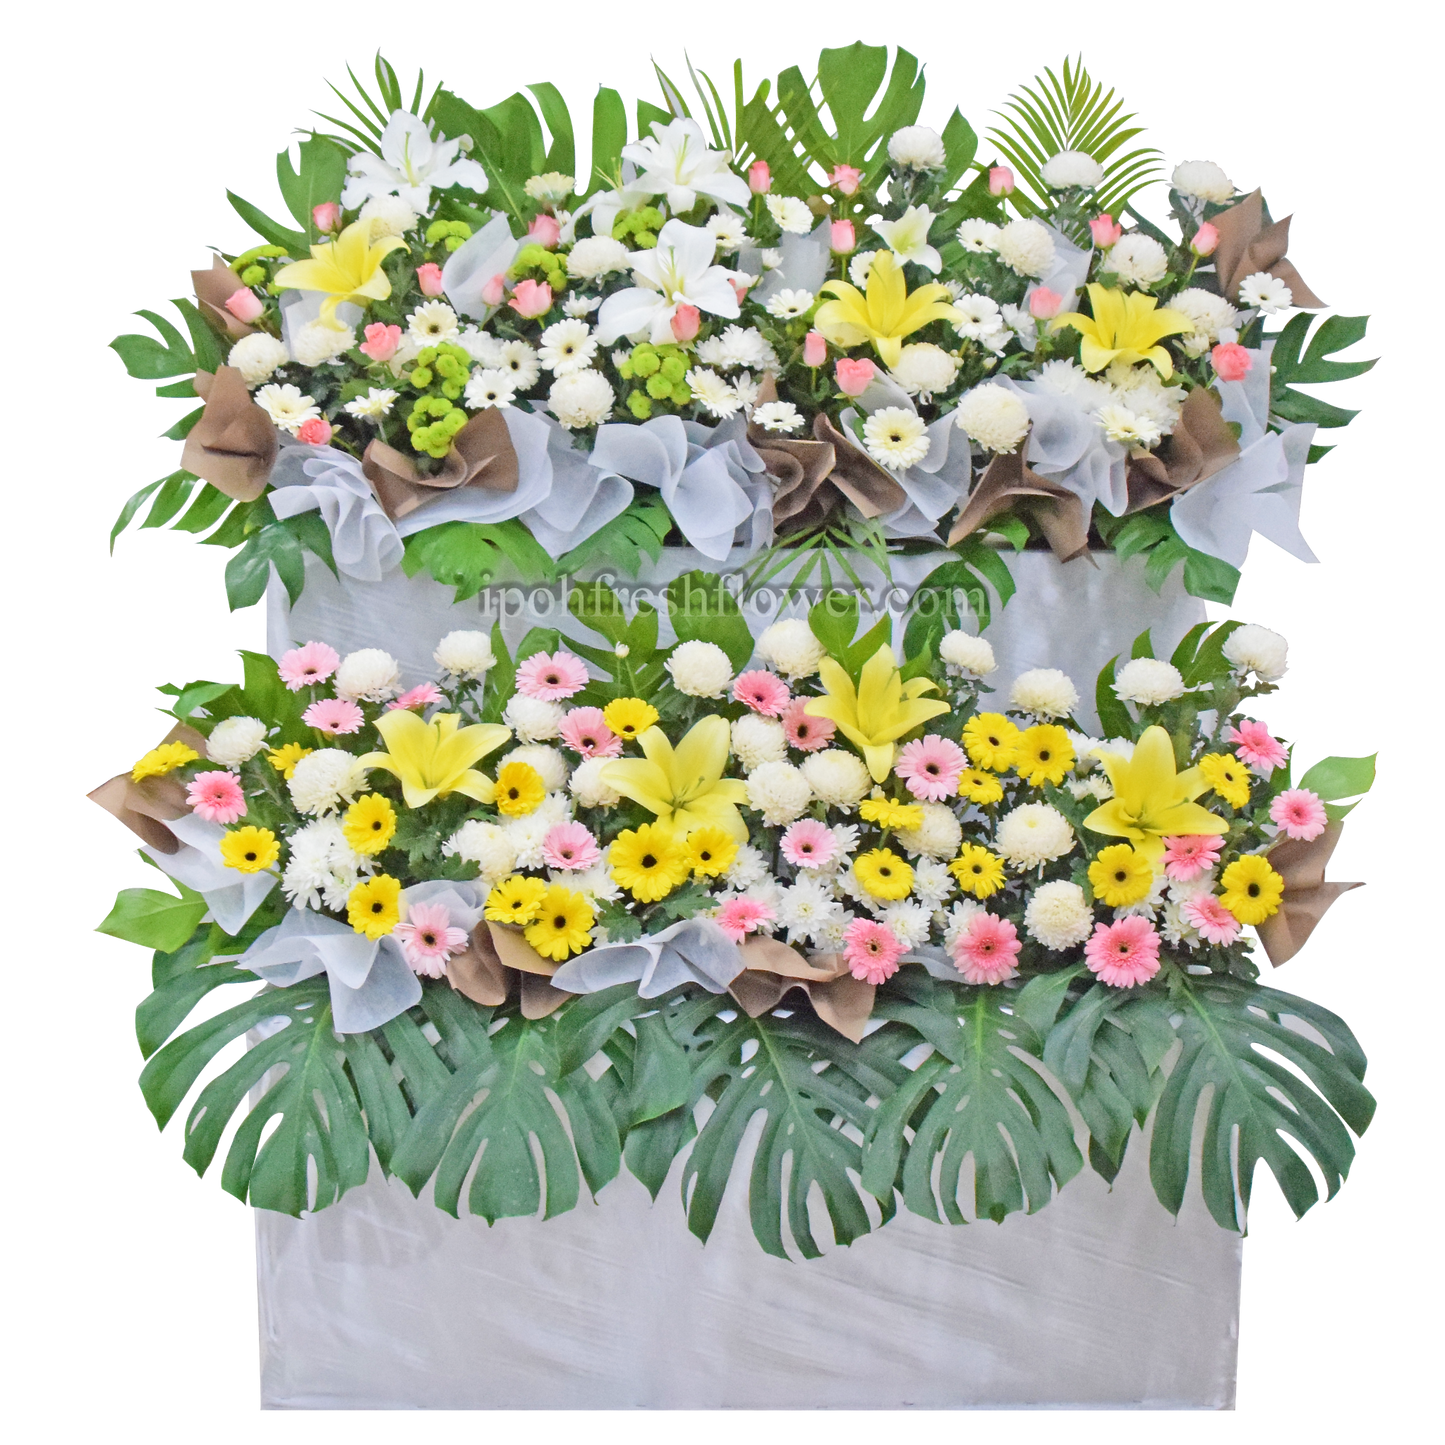 Amazing Grace Wreath| Premium Condolence Flower Stand| Same Day Free Delivery